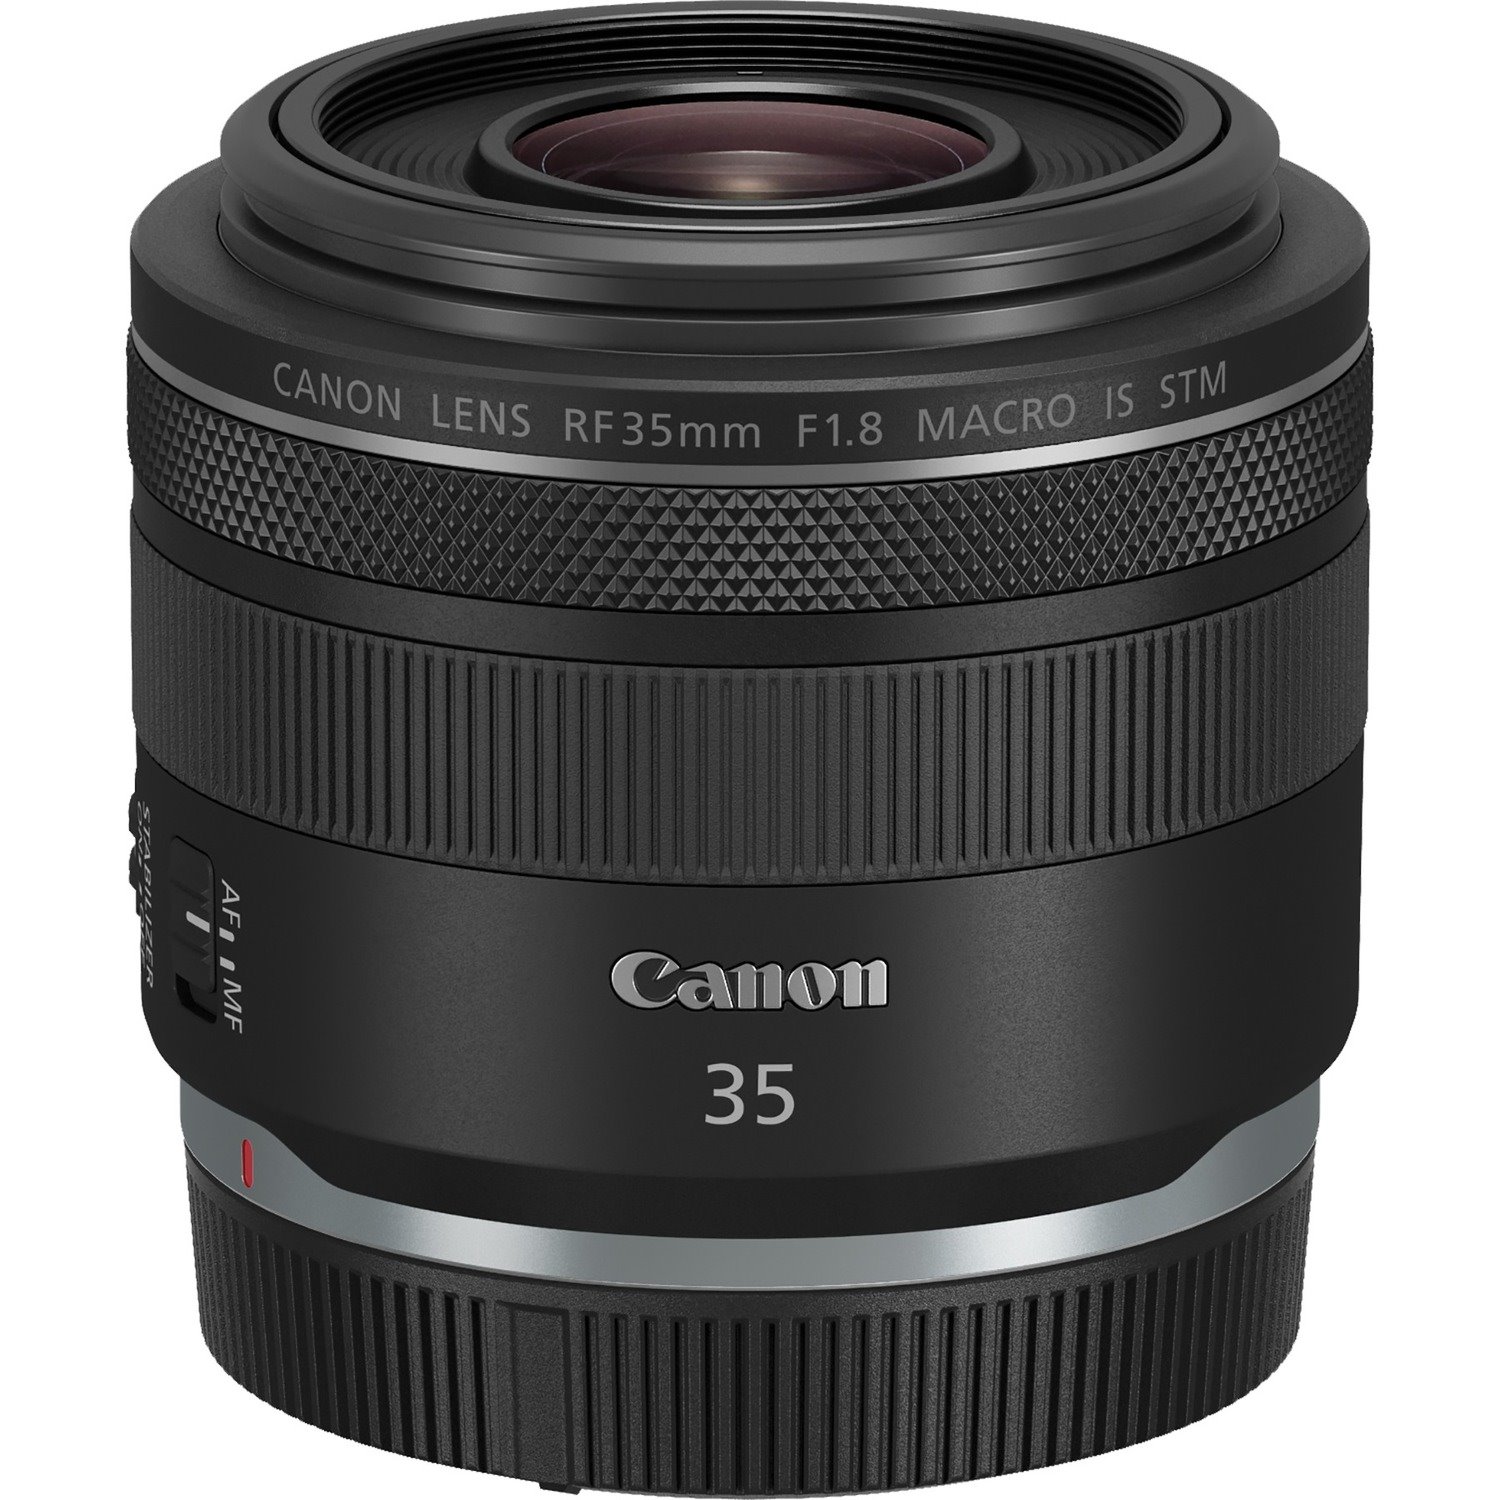 Canon - 35 mmf/1.8 - Wide Angle/Macro Fixed Lens for Canon RF